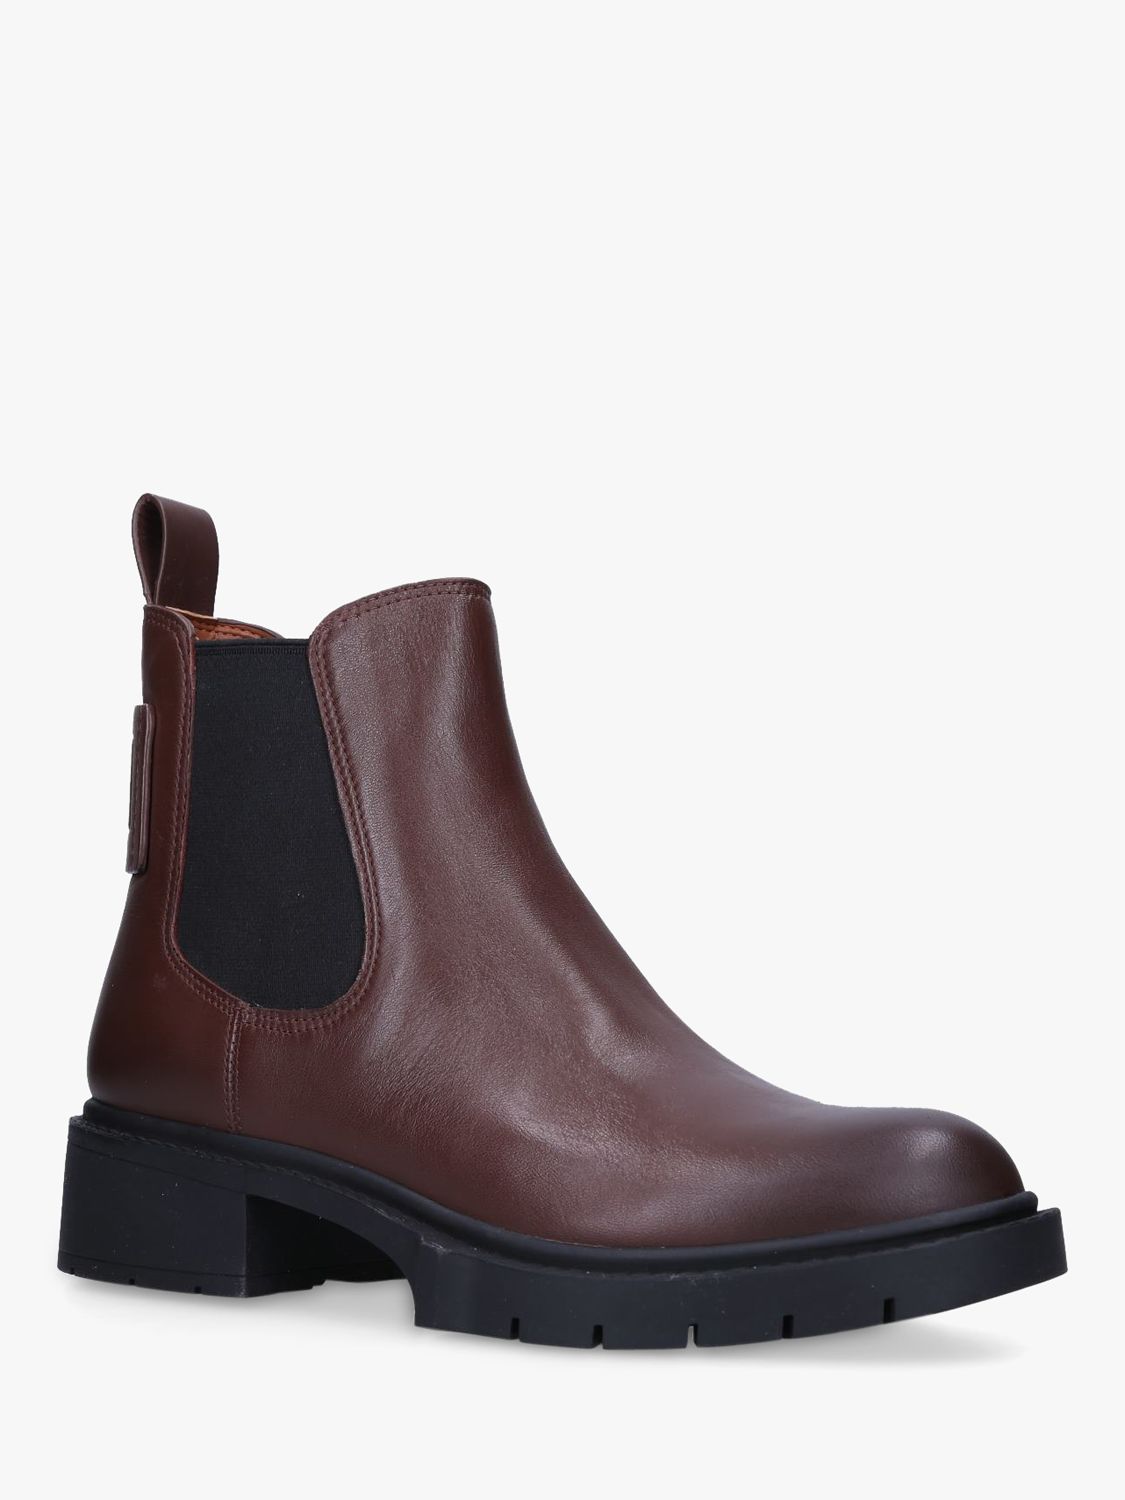 Coach Lyden Leather Ankle Boots